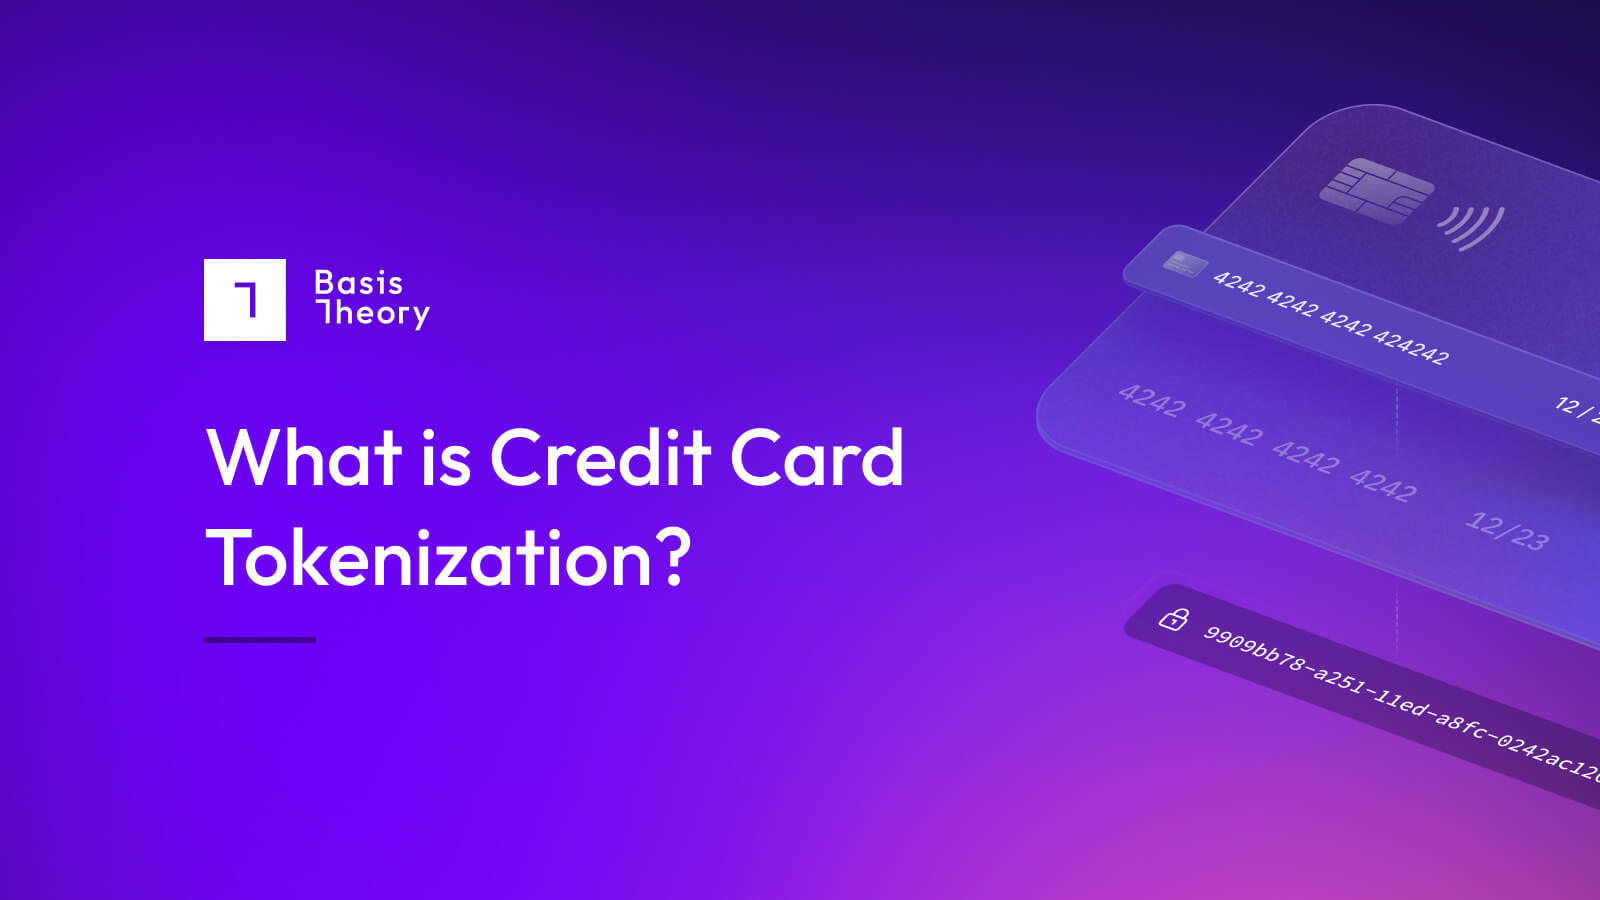 What is credit card tokenization?